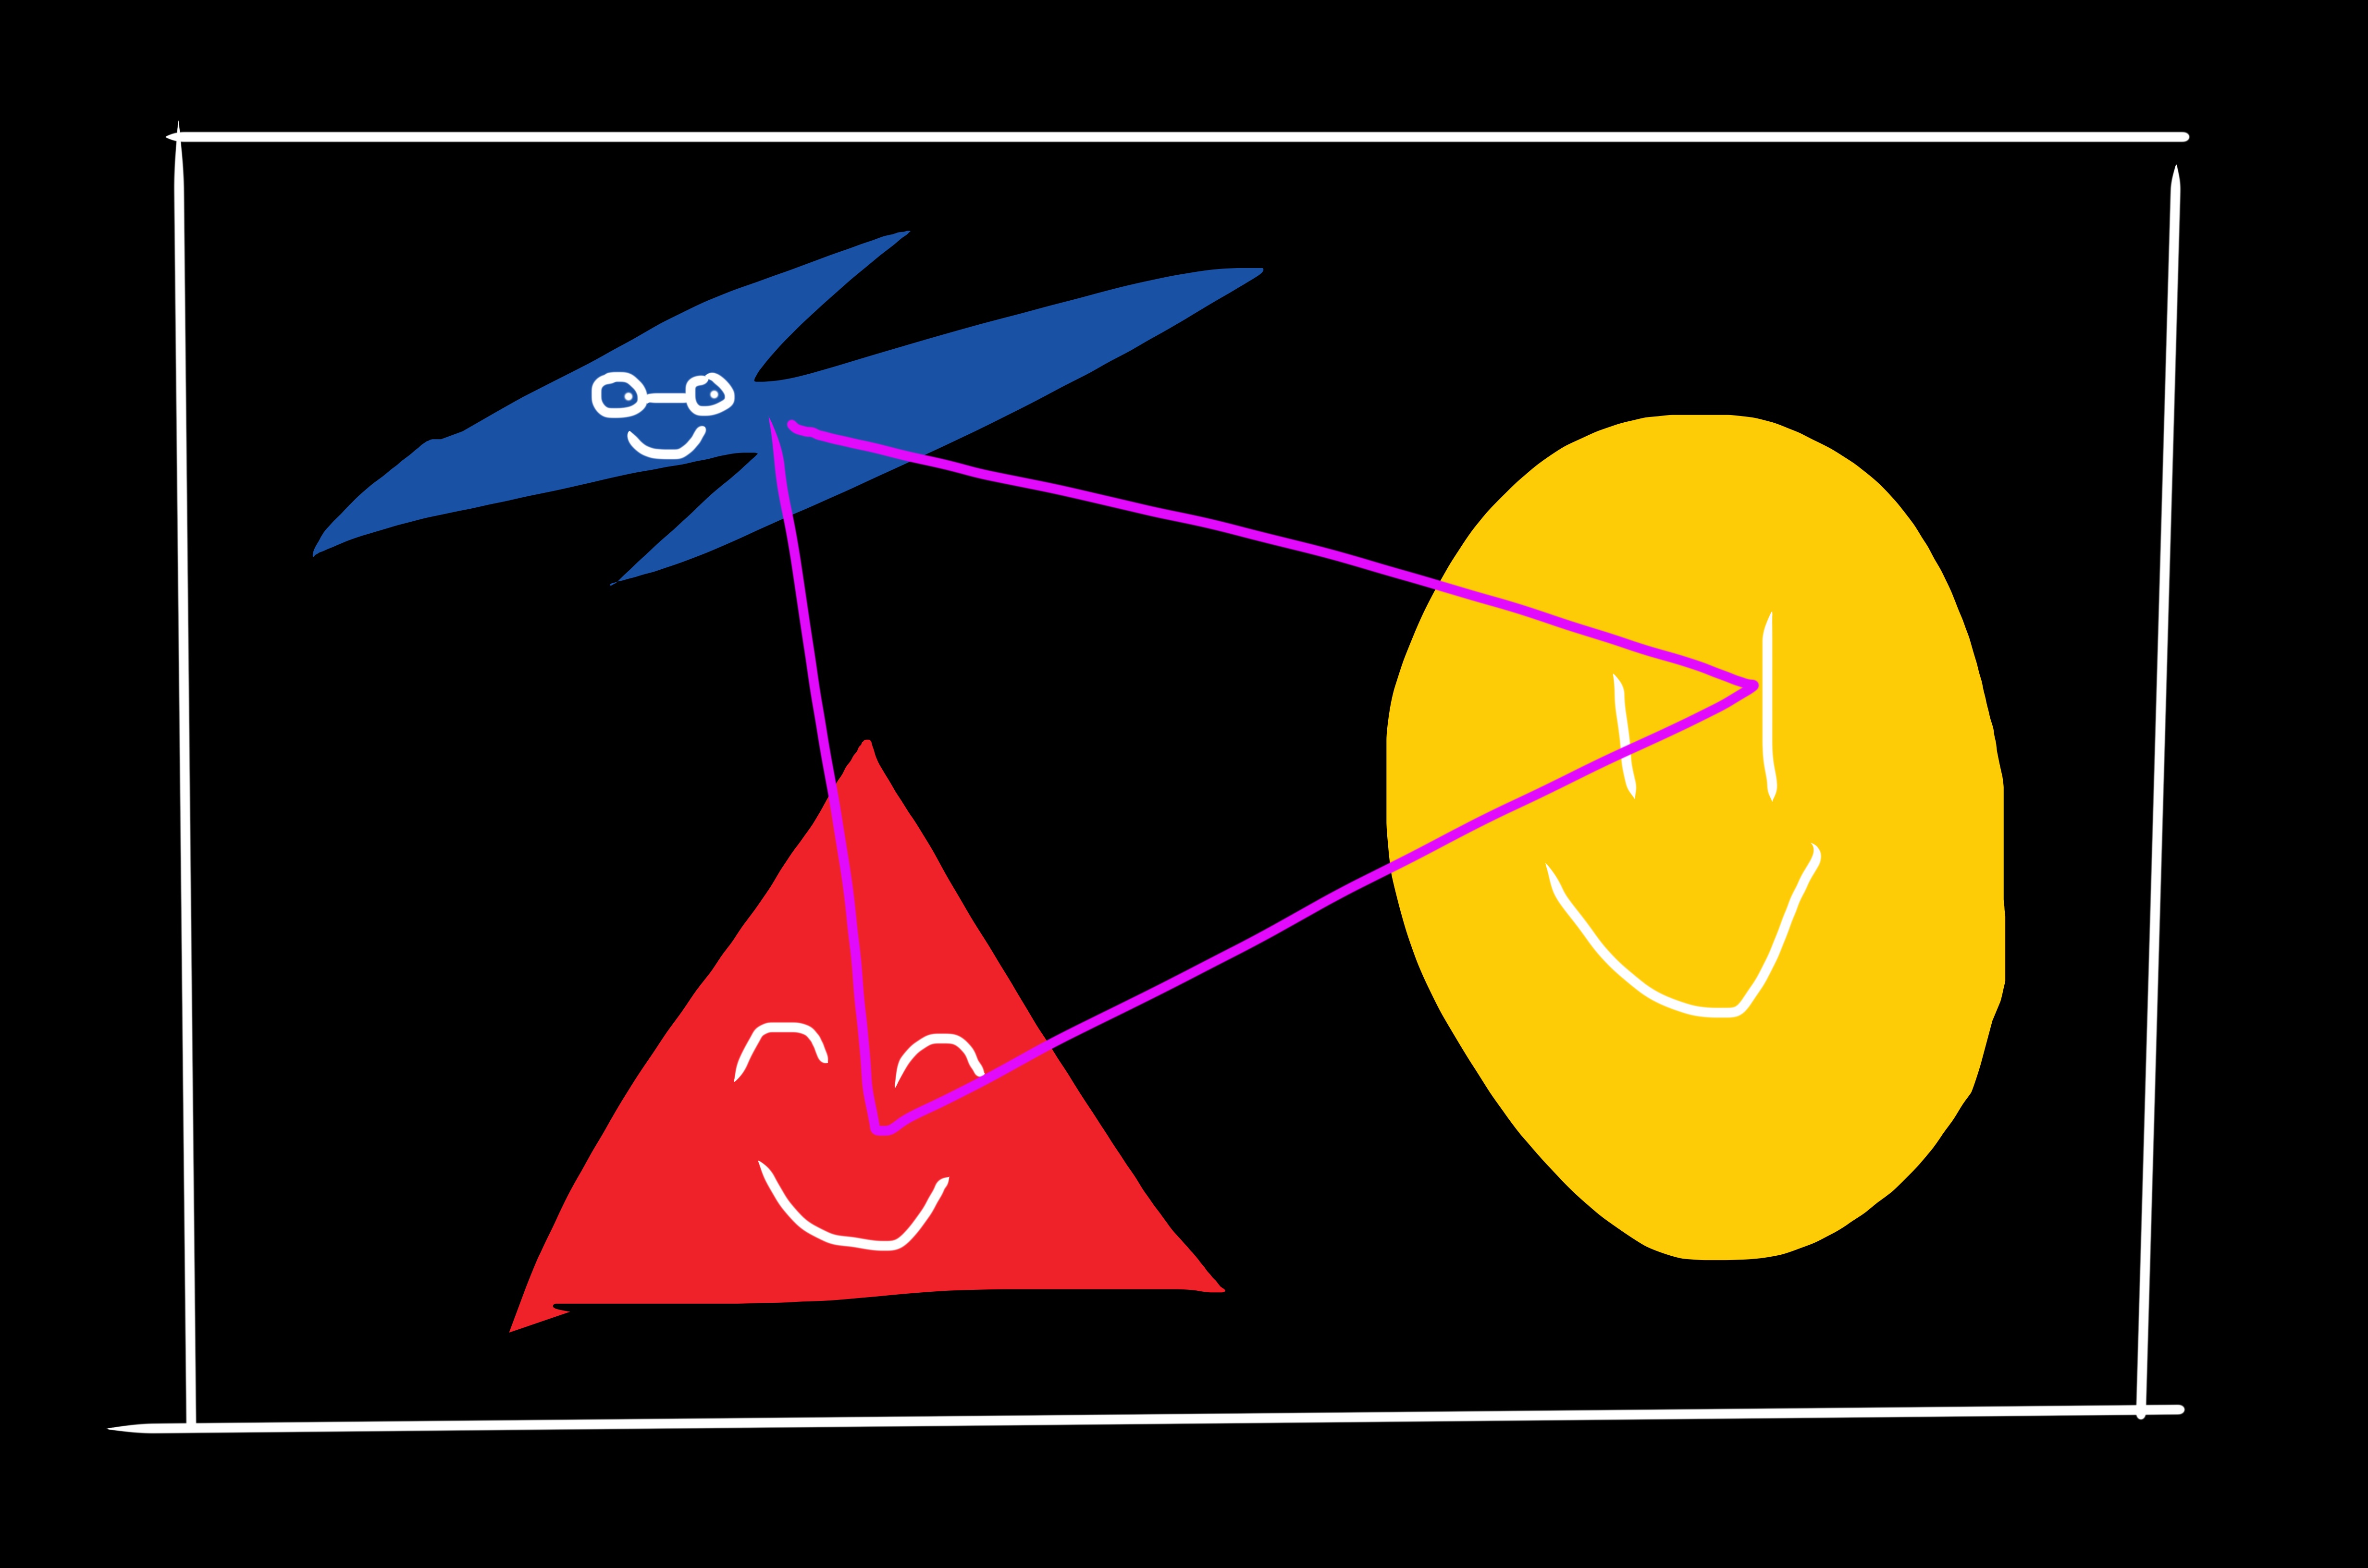 Triangle composition of these three guys, shown in pink